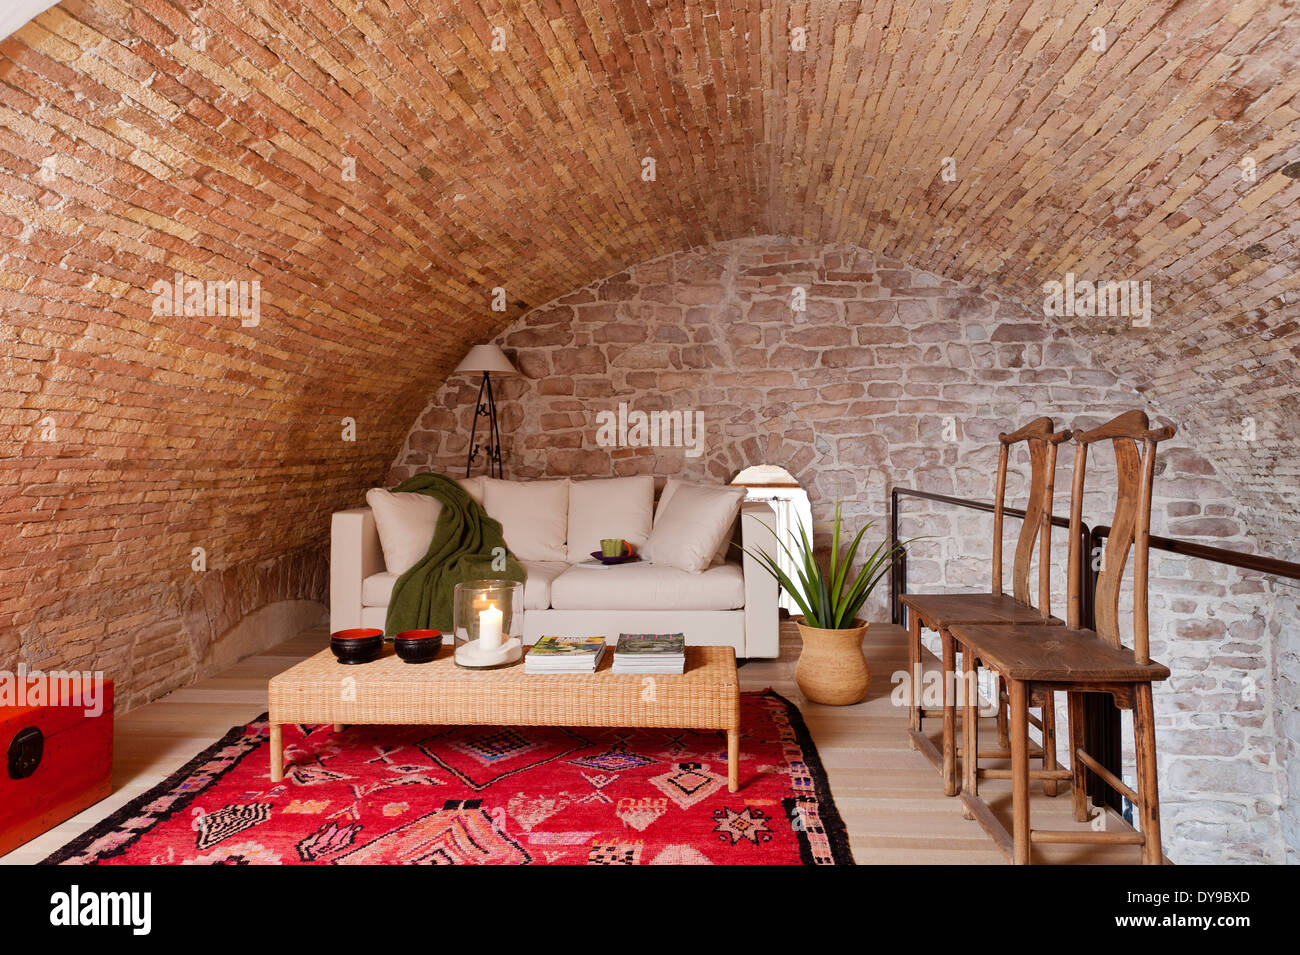 Vaulted stone walls in mezzanine space with white sofa bed, wicker coffee table and bright red ethnic rug Stock Photo